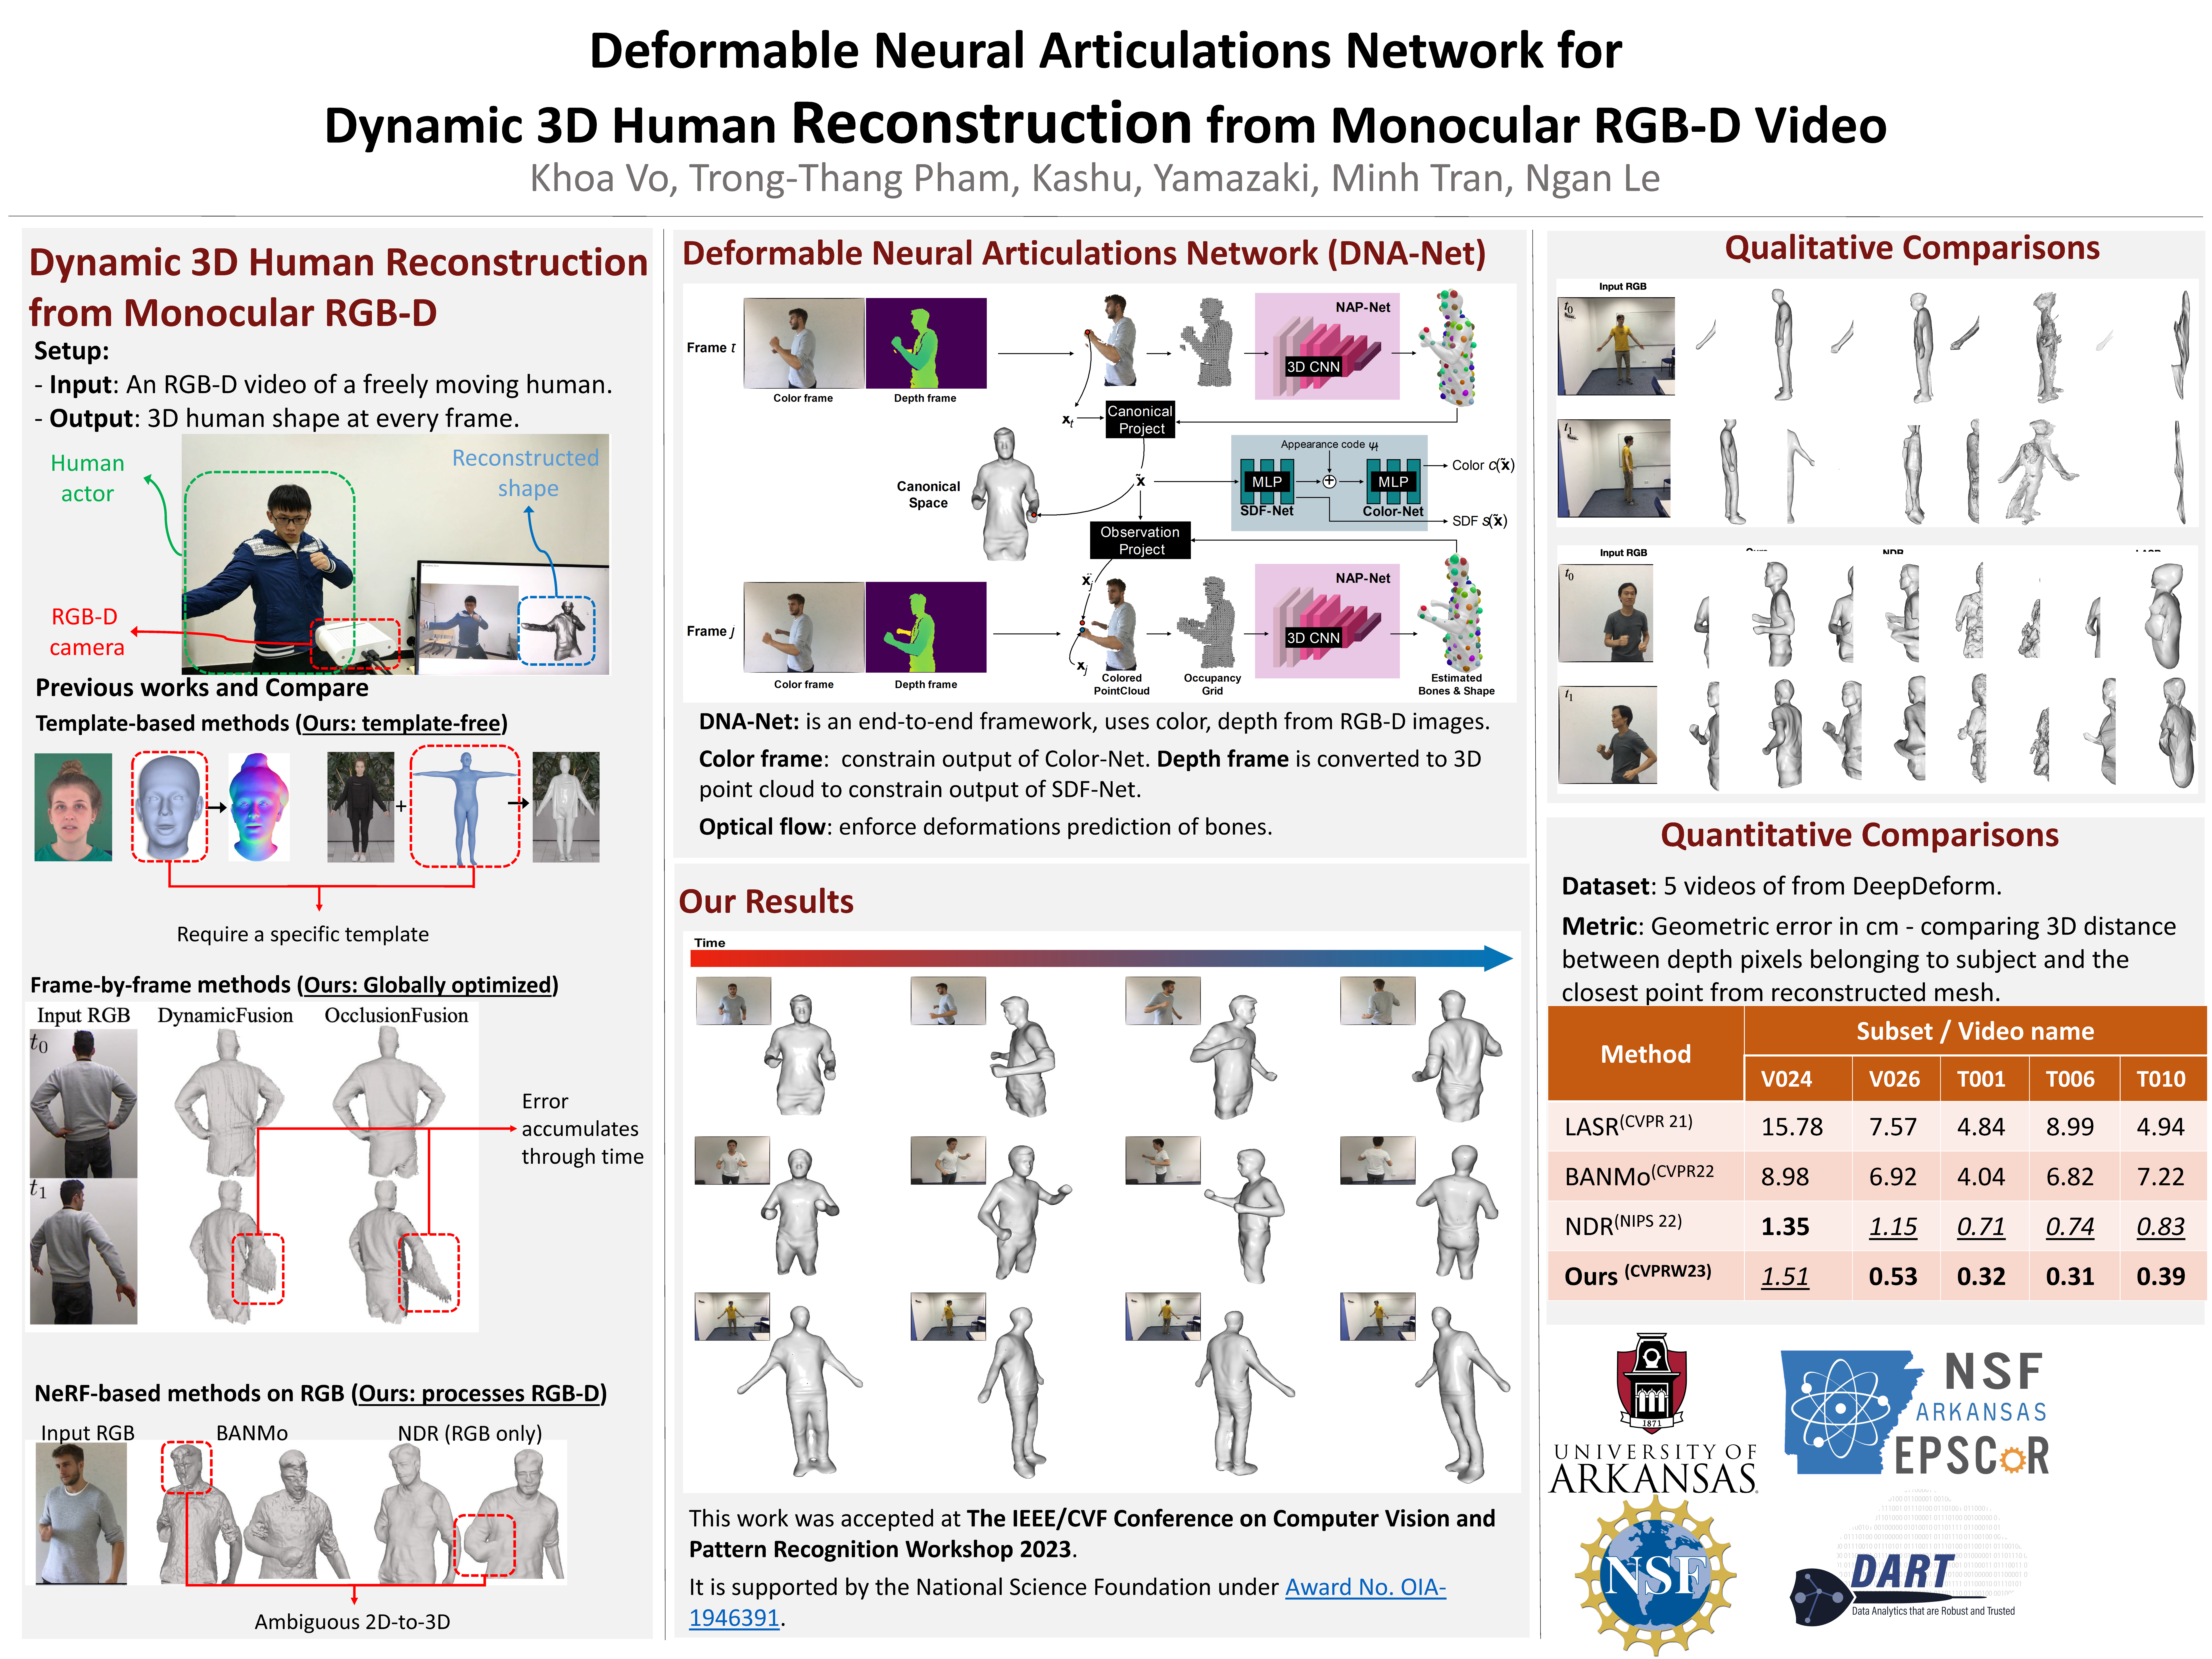 Deformable Neural Articulations Network for Dynamic 3D Human Reconstruction from Monocular RGB-D Video